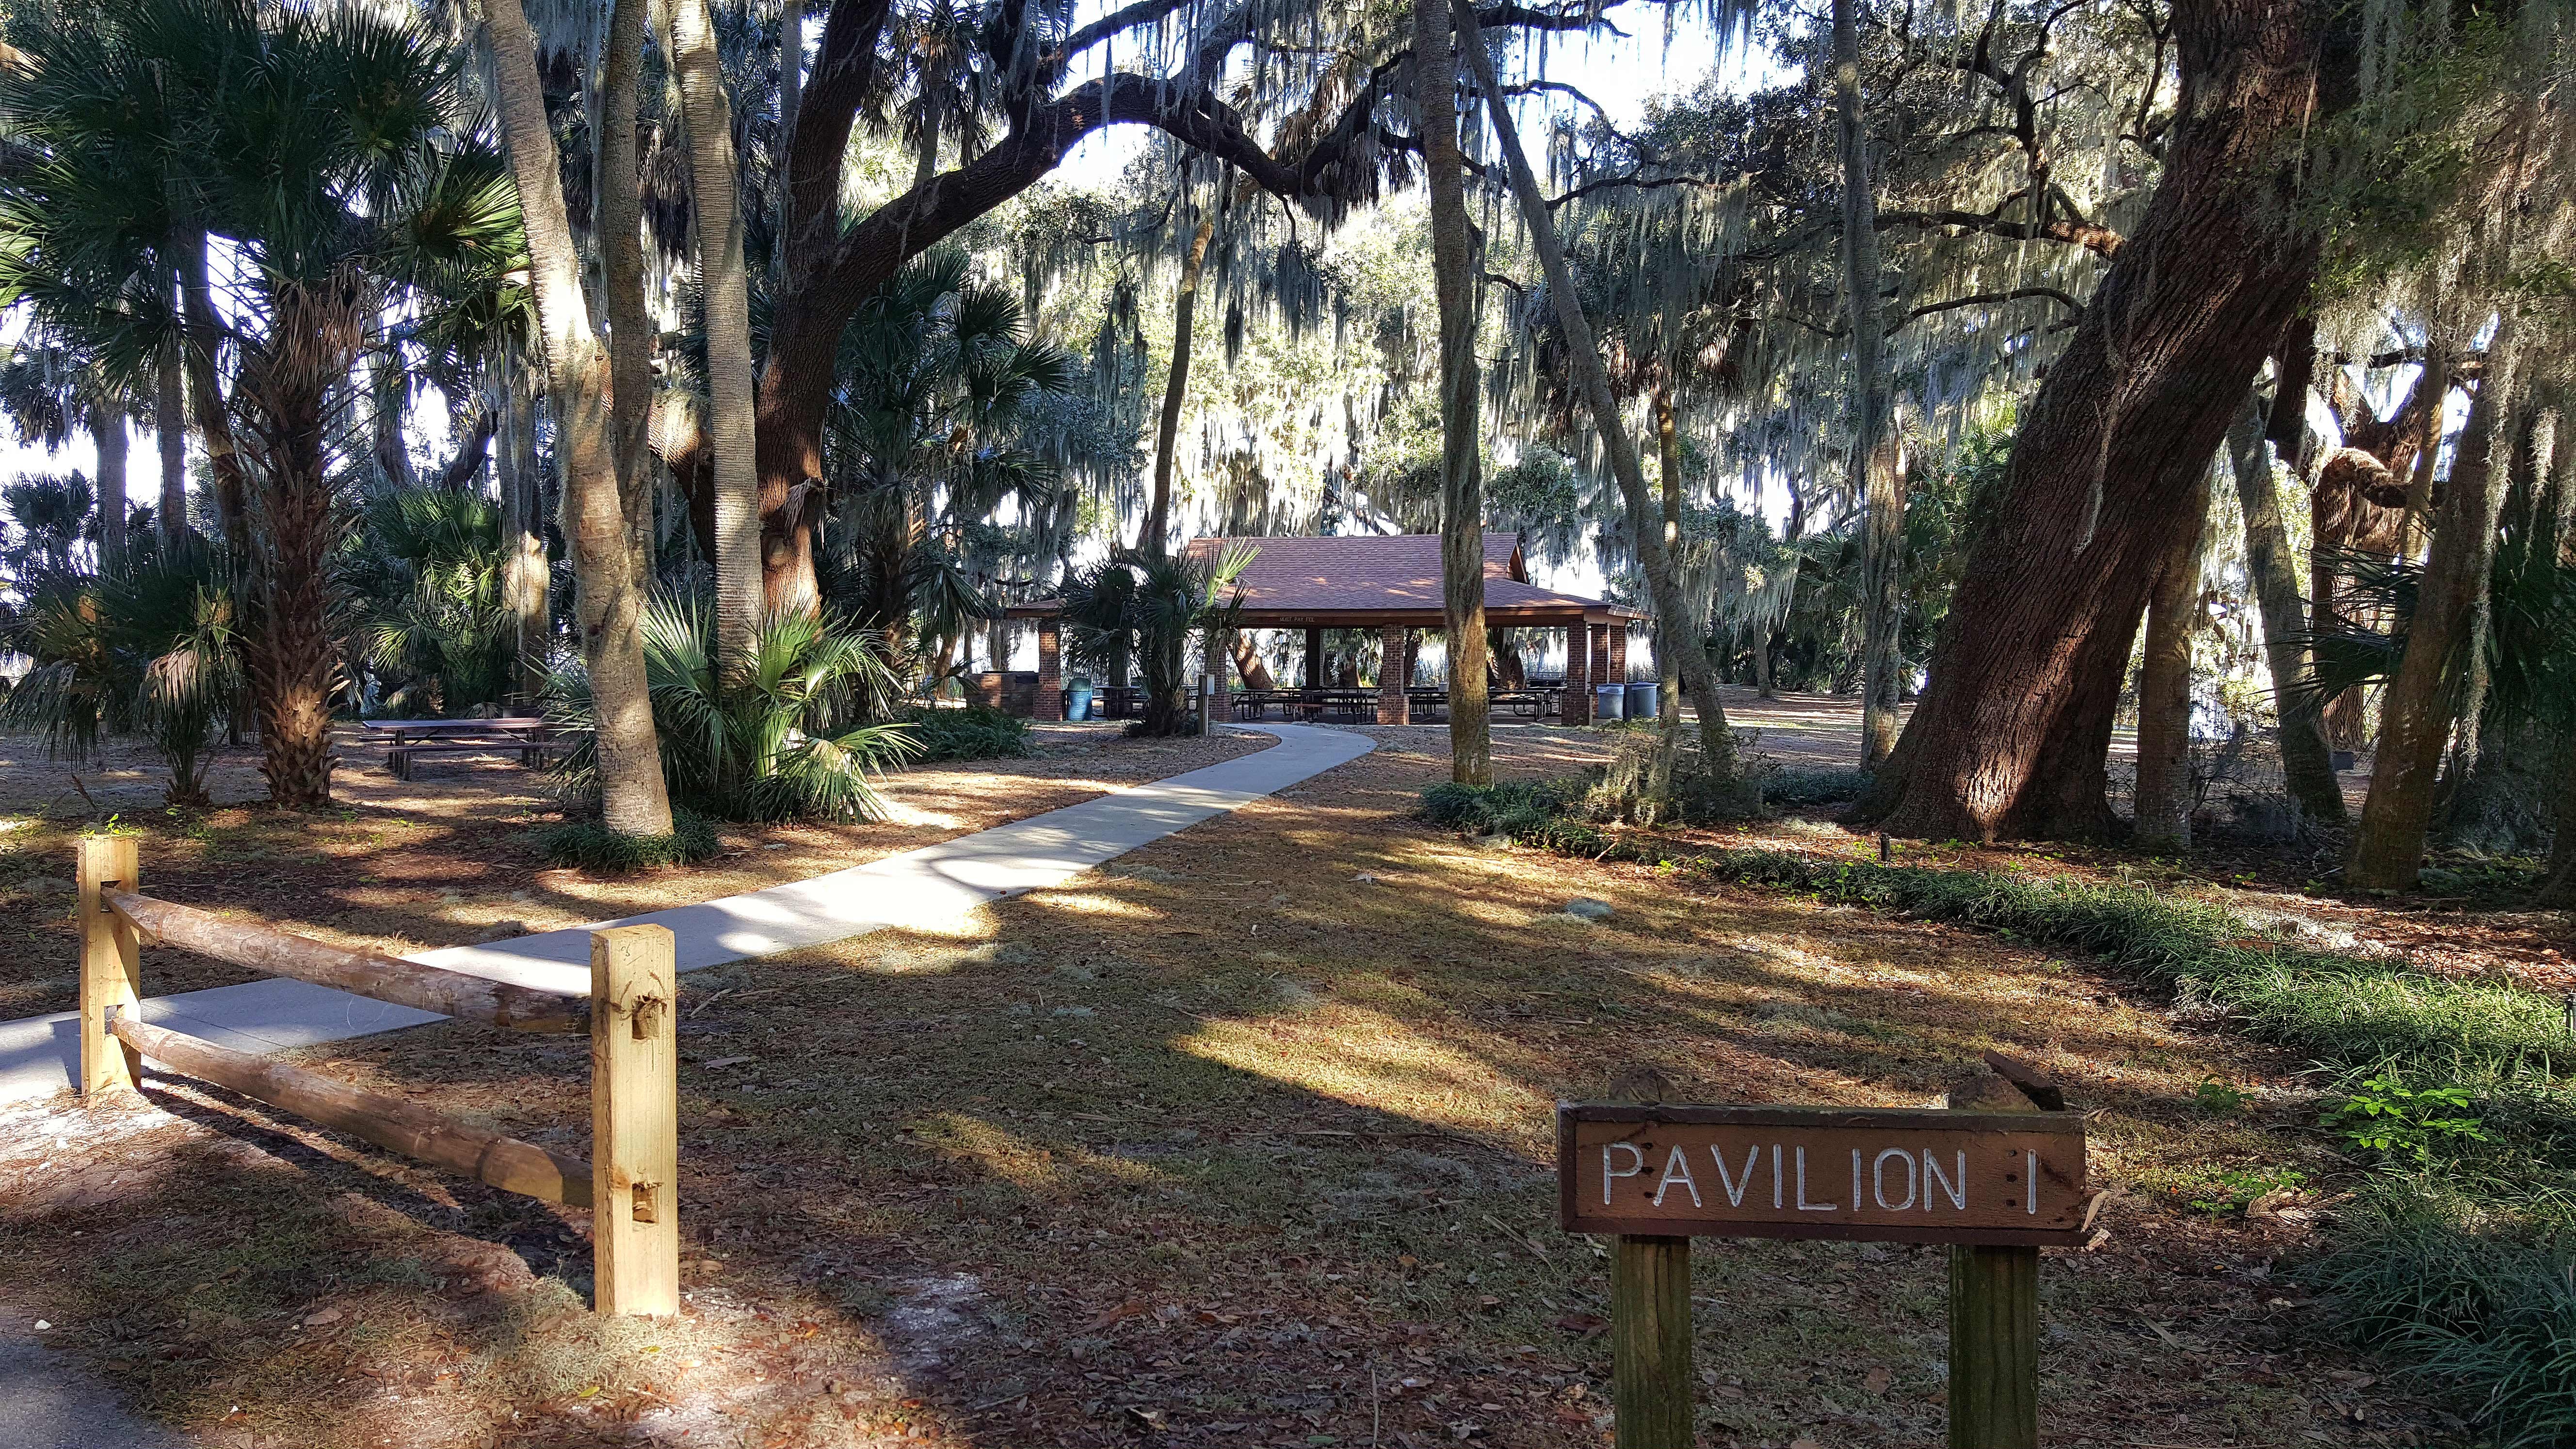 Pavilion is perfect for picnicking or family gatherings.